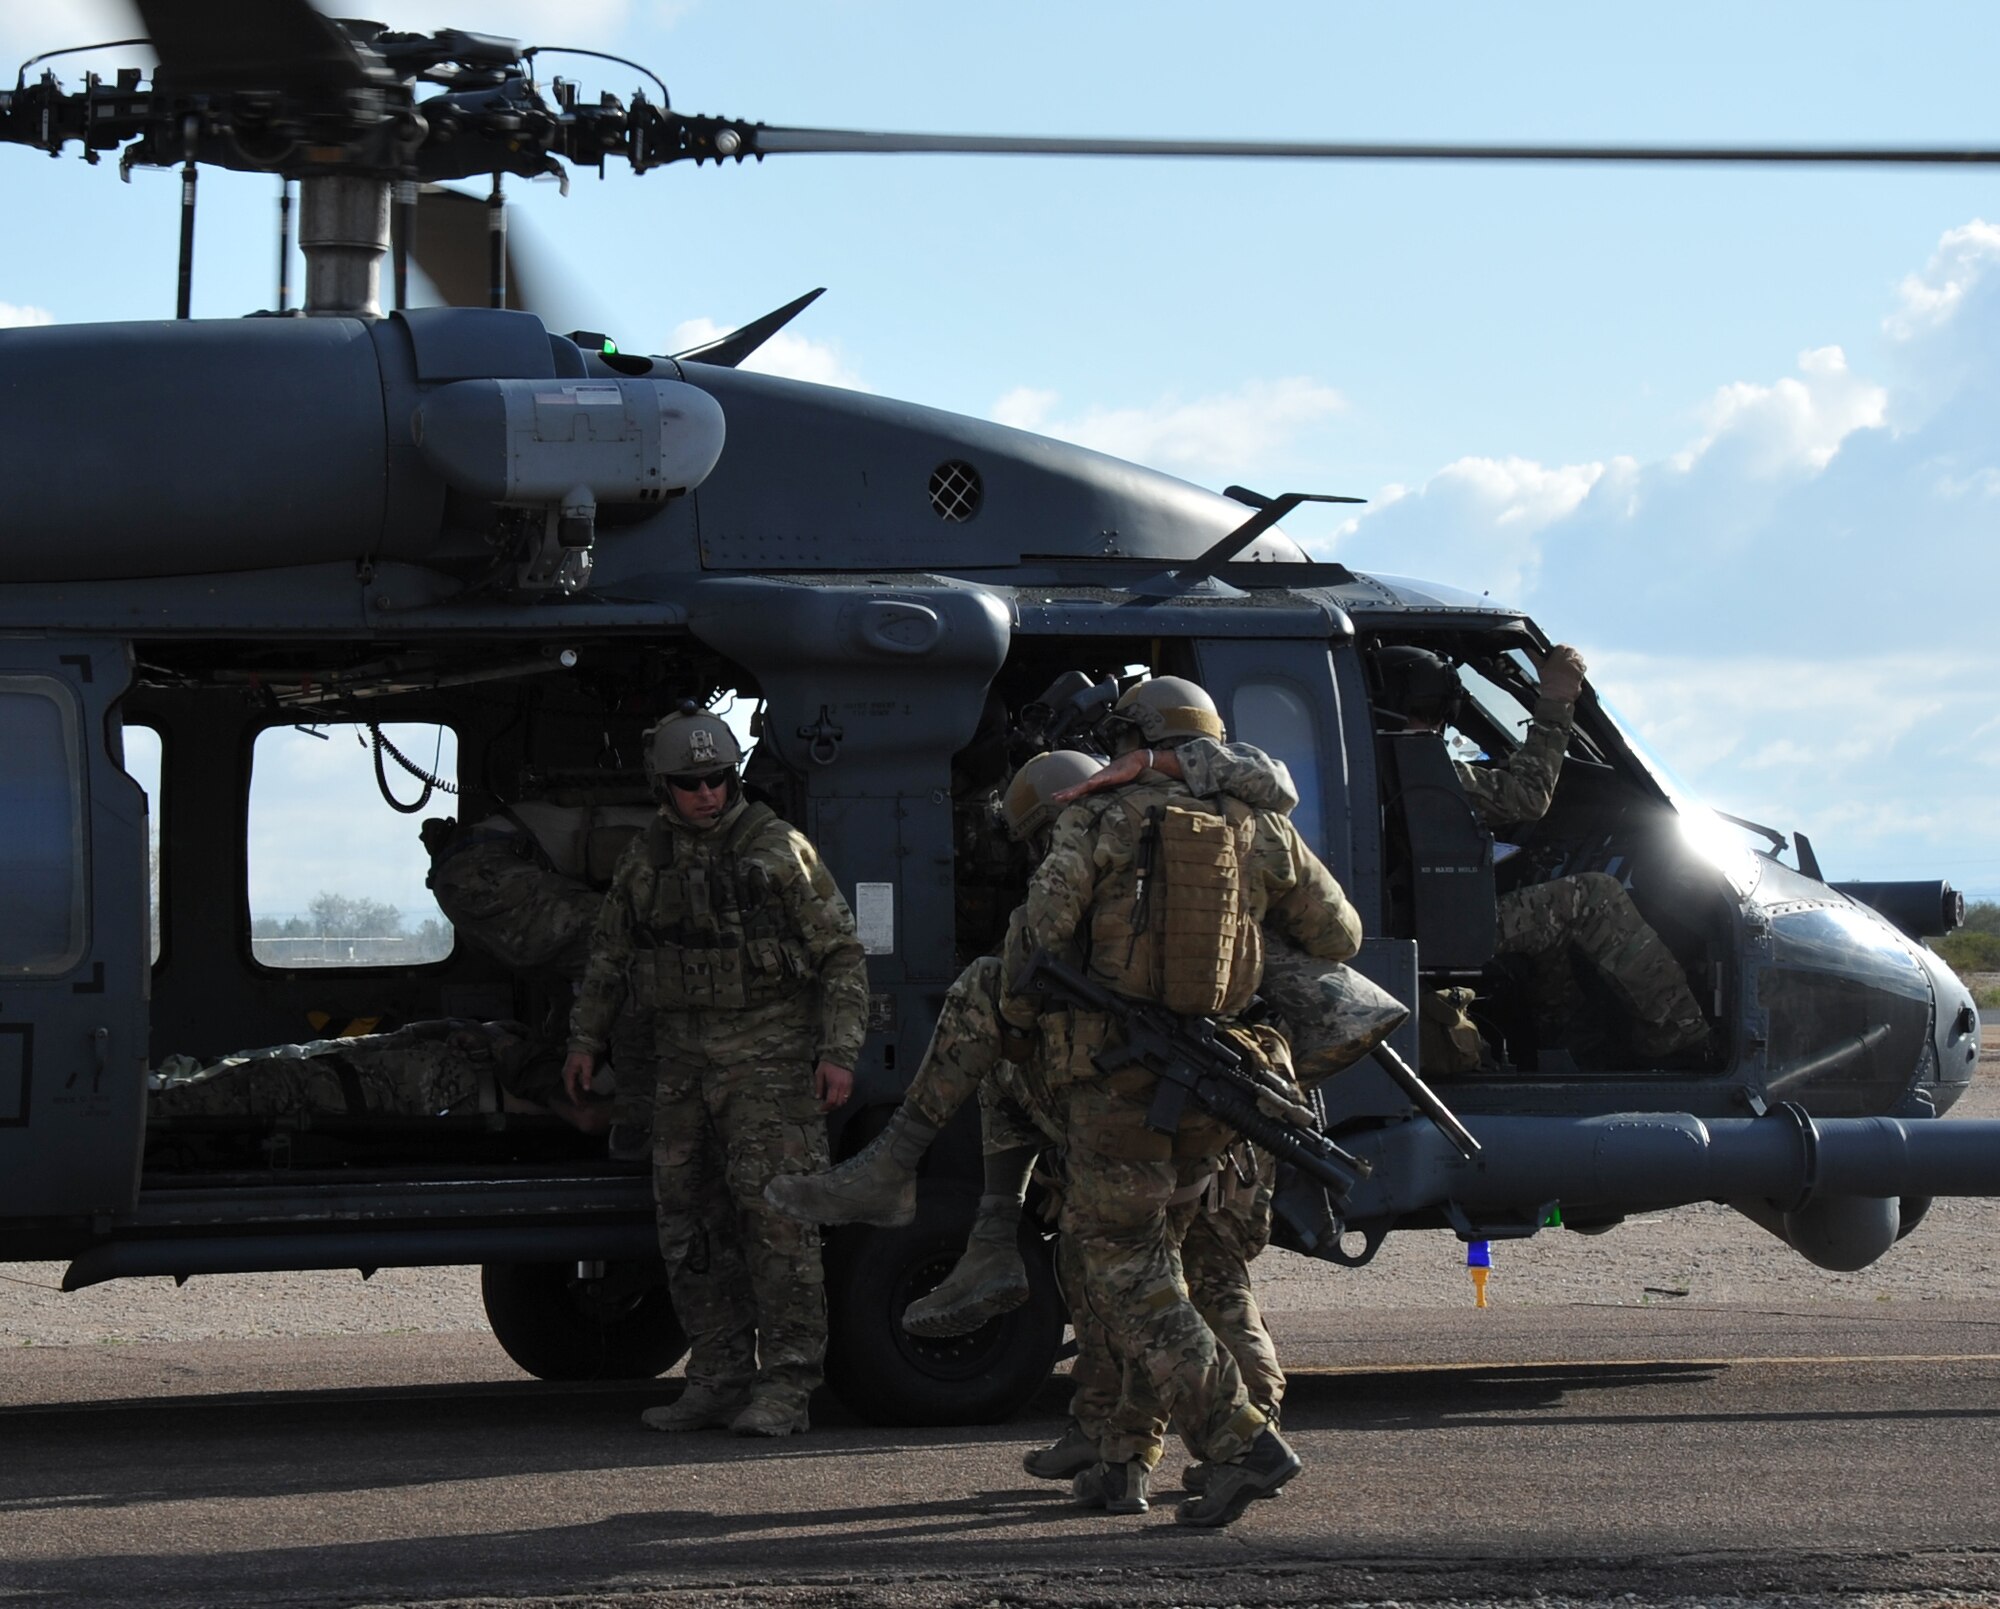 Pararescuemen from the 306th Rescue Squadron load patients on a HH-60G Pave Hawk from the 305th Rescue Squadron helicopter during a pre-deployment training exercise in December 2011. Both the 305th and 306th Rescue Squadrons are part of the 943rd Rescue Group, which is the only rescue group in the entire Air Force Reserve. It's mission is to train personnel, with equipment, to achieve and maintain the capability to perform day or night combat rescue missions; search for, locate and recover U.S. Air Force and other Department of Defense personnel involved with U.S. defense activities; provide search and rescue support of civilians as directed by the Air Force Rescue Coordination Center; and provide humanitarian and disaster relief operations. (U.S. Air Force Photo/ Master Sgt. Luke Johnson)